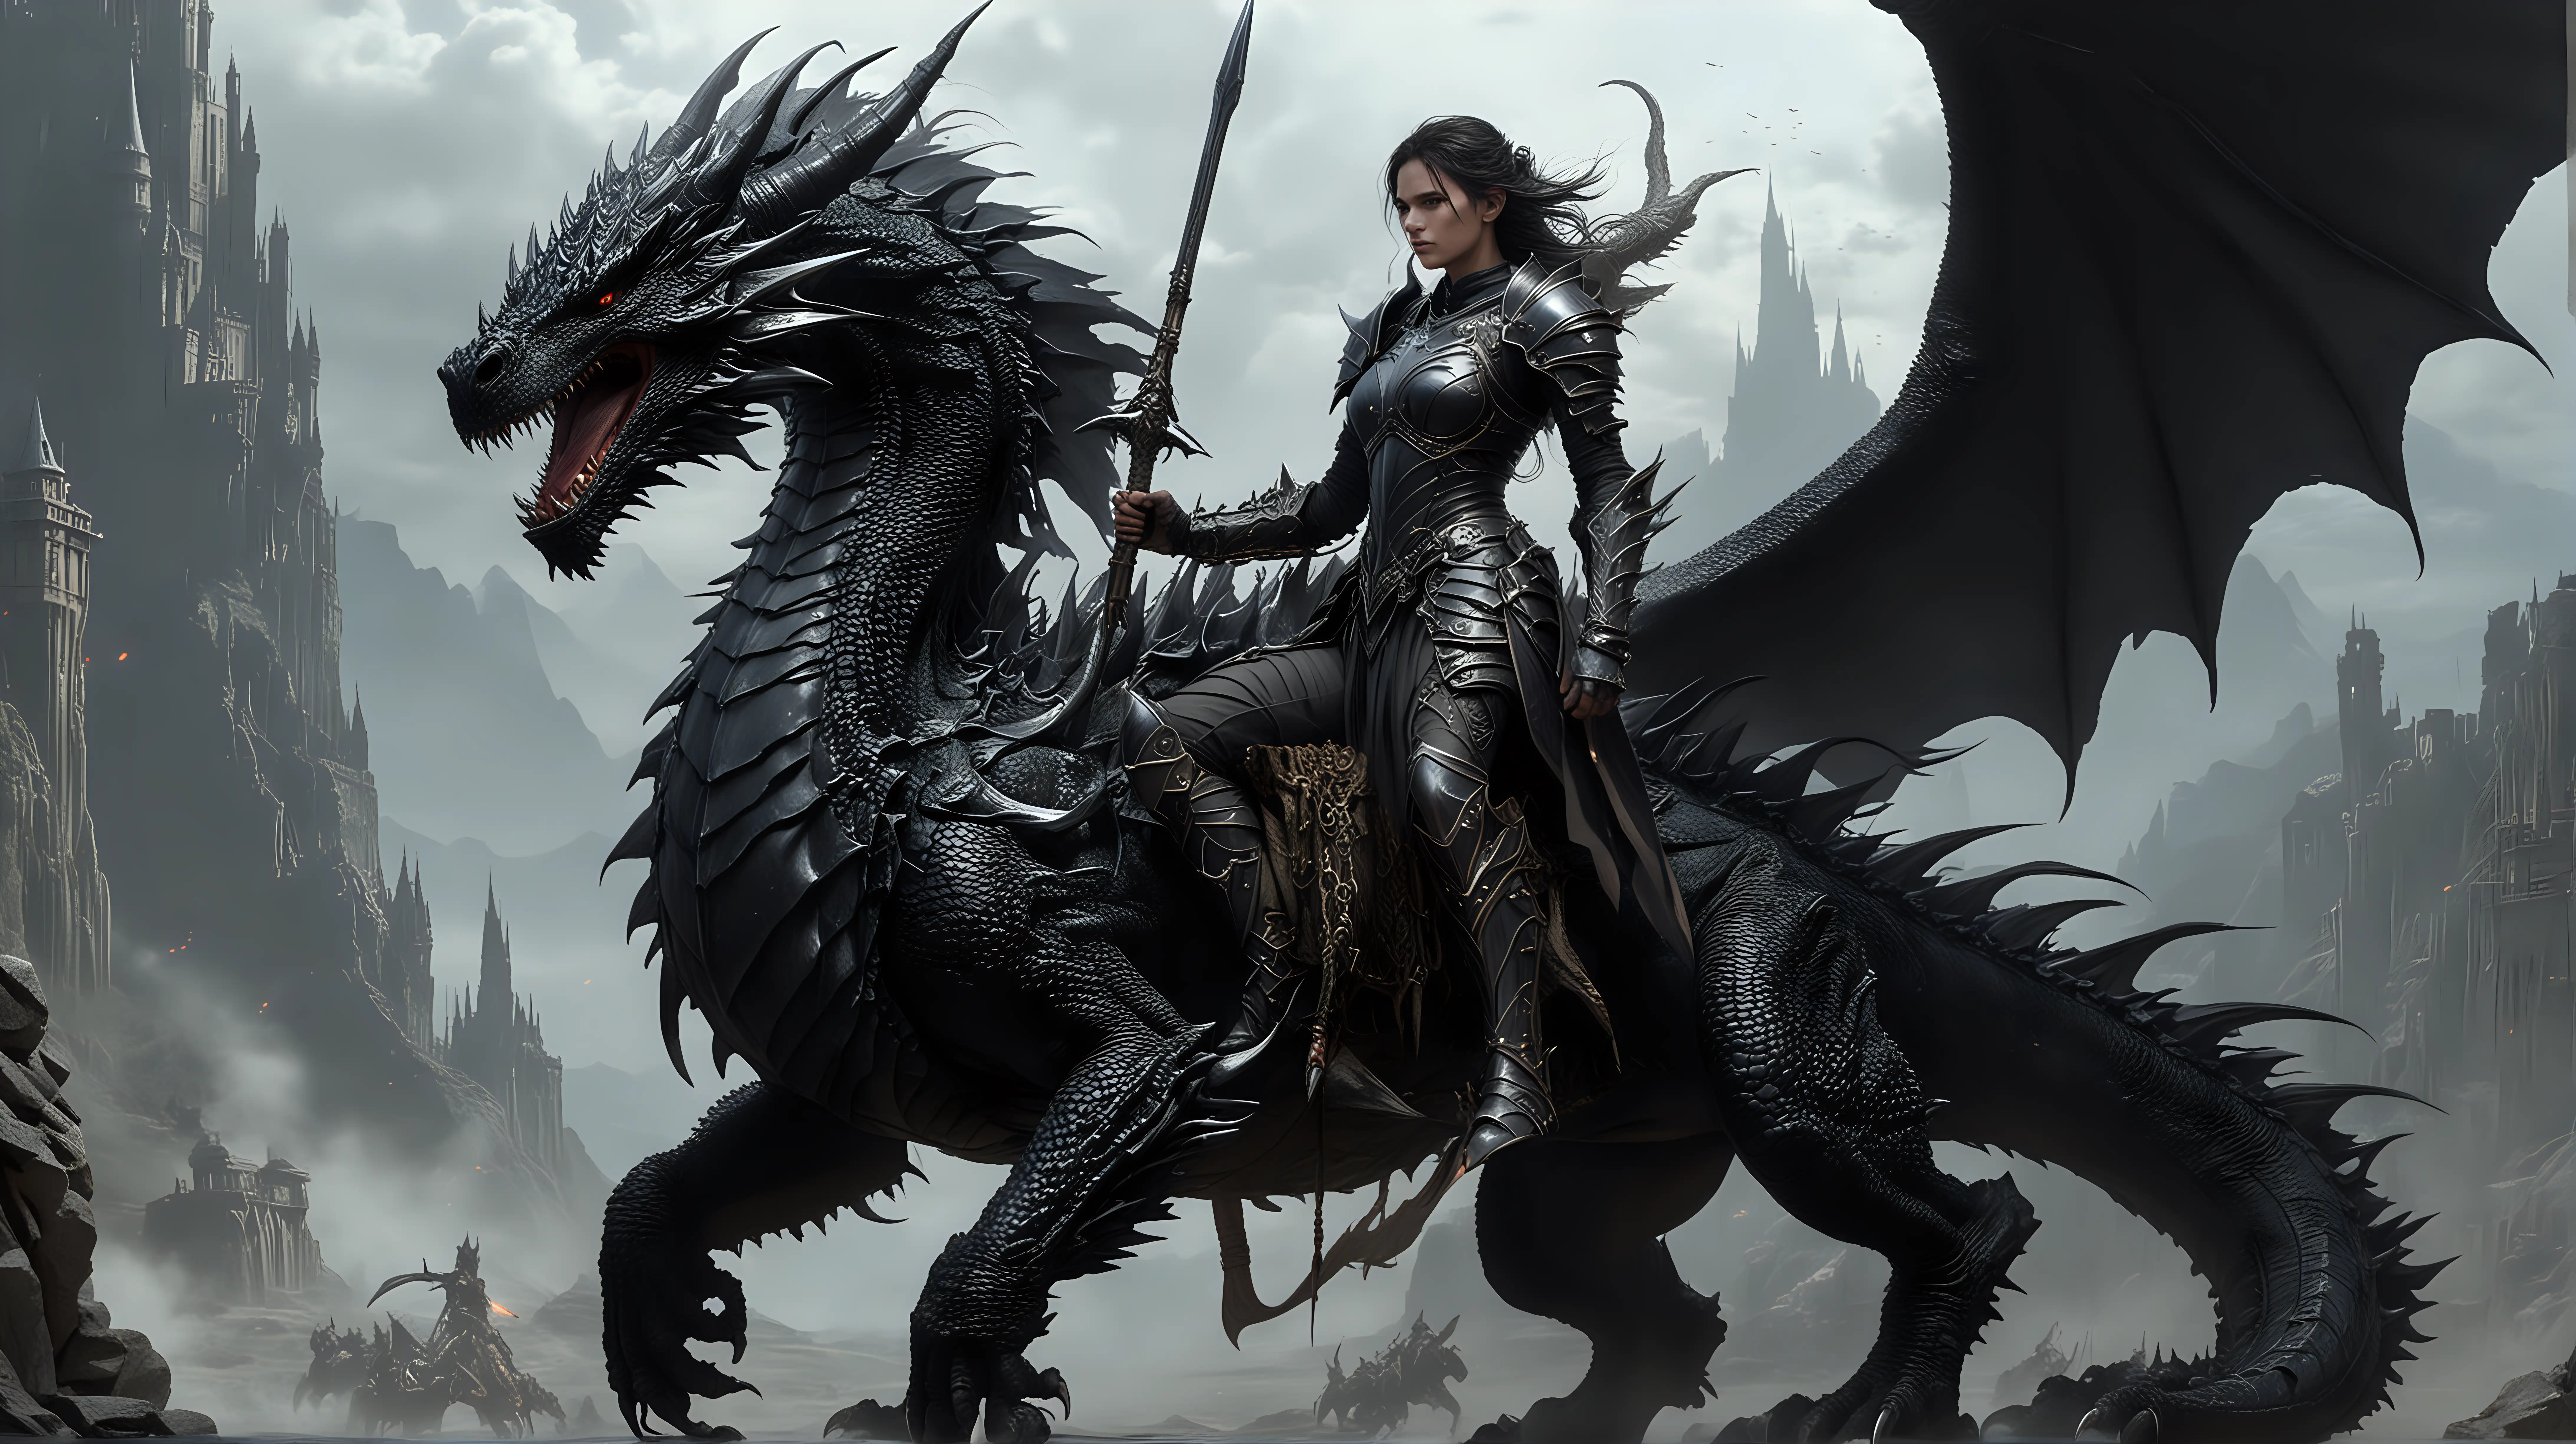 Majestic Black Dragon Confronted by Armored Warrior with Spear